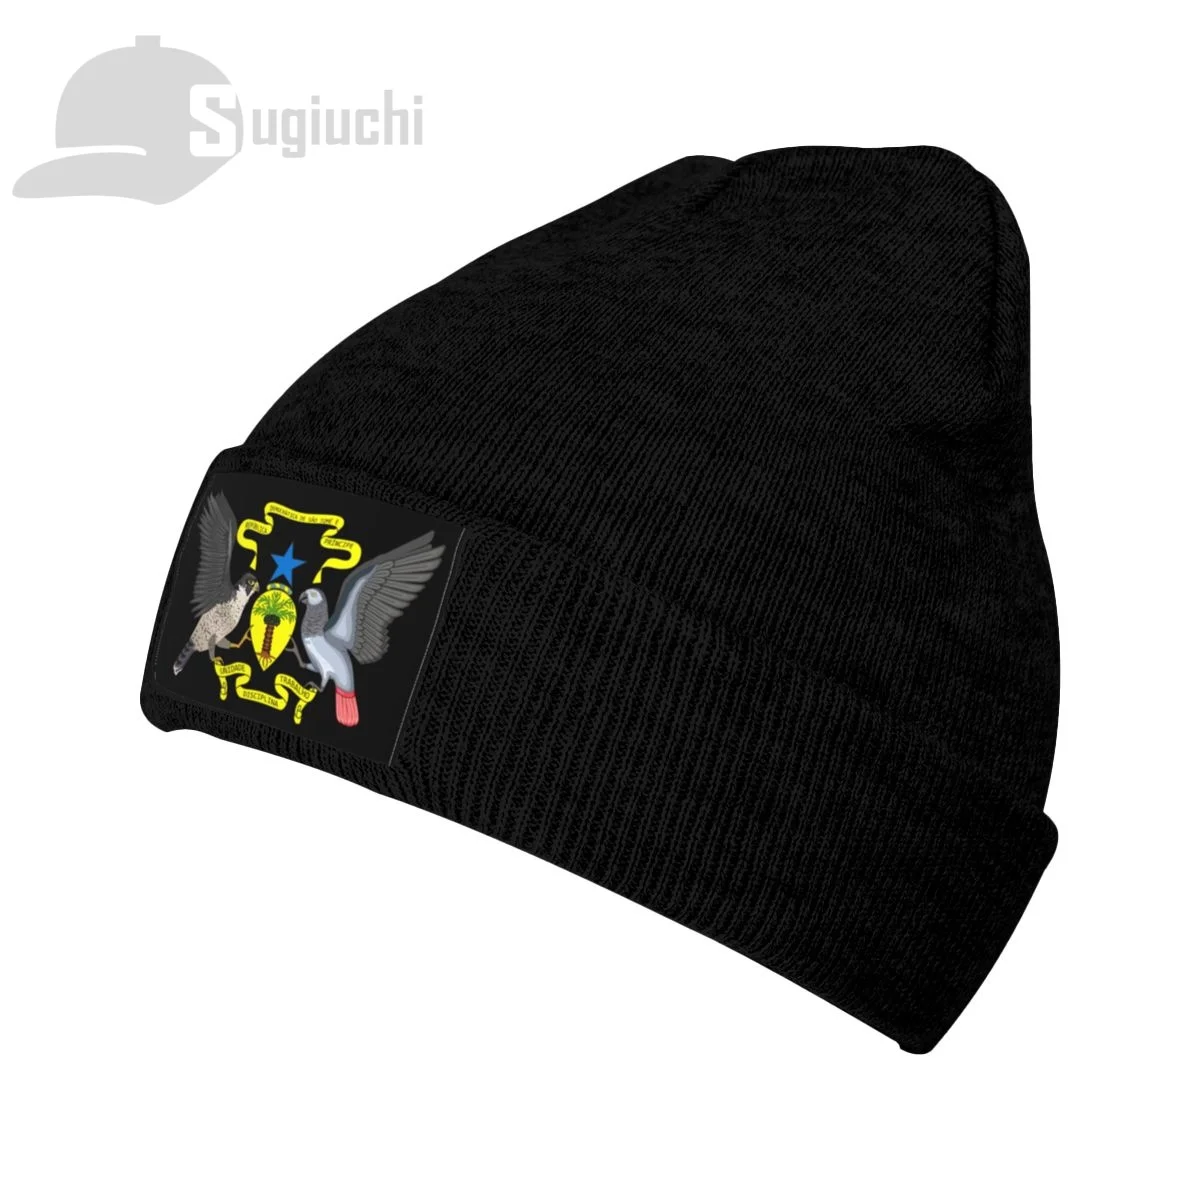 

Emblem Of Sao Tome And Principe Country Top Print Men Women Unisex Knitted Hat Winter Autumn Beanie Cap Warm Bonnet